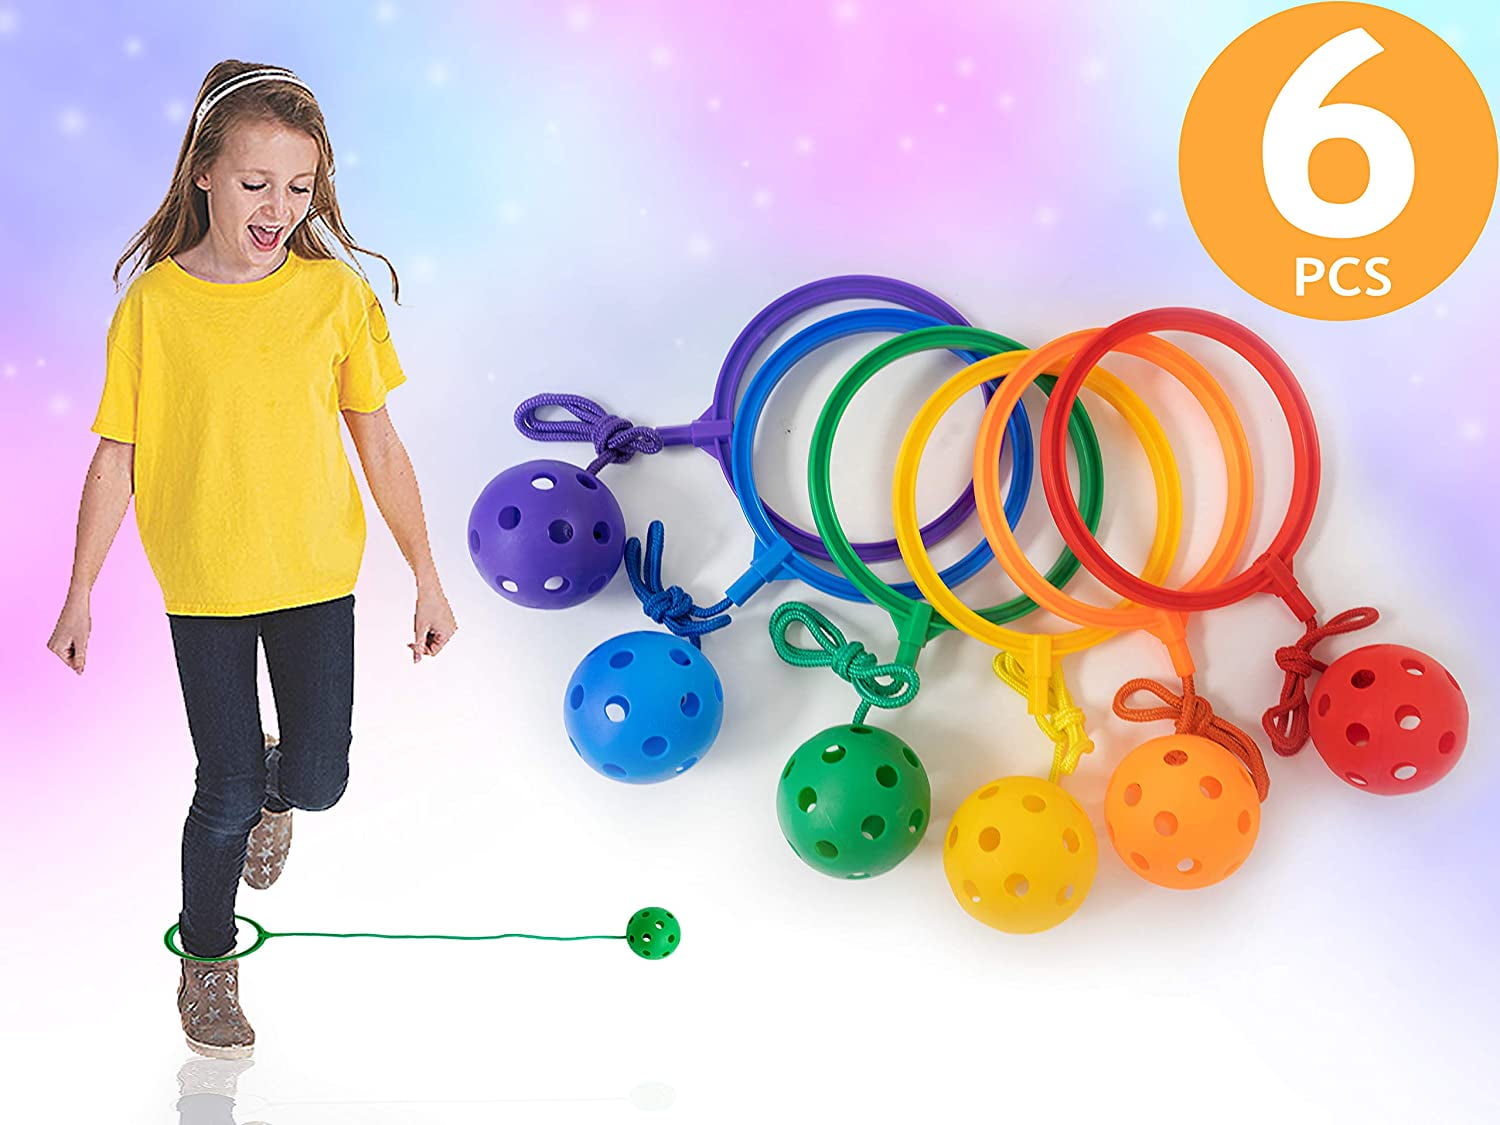 Balance Fun Excercise Coordinate Best Swing Ball Game for Boys Girls and Kids Play Indoor and Outdoor Fitness Skip Jump Rope Ball Kids Swing Ball Jumping Toy 